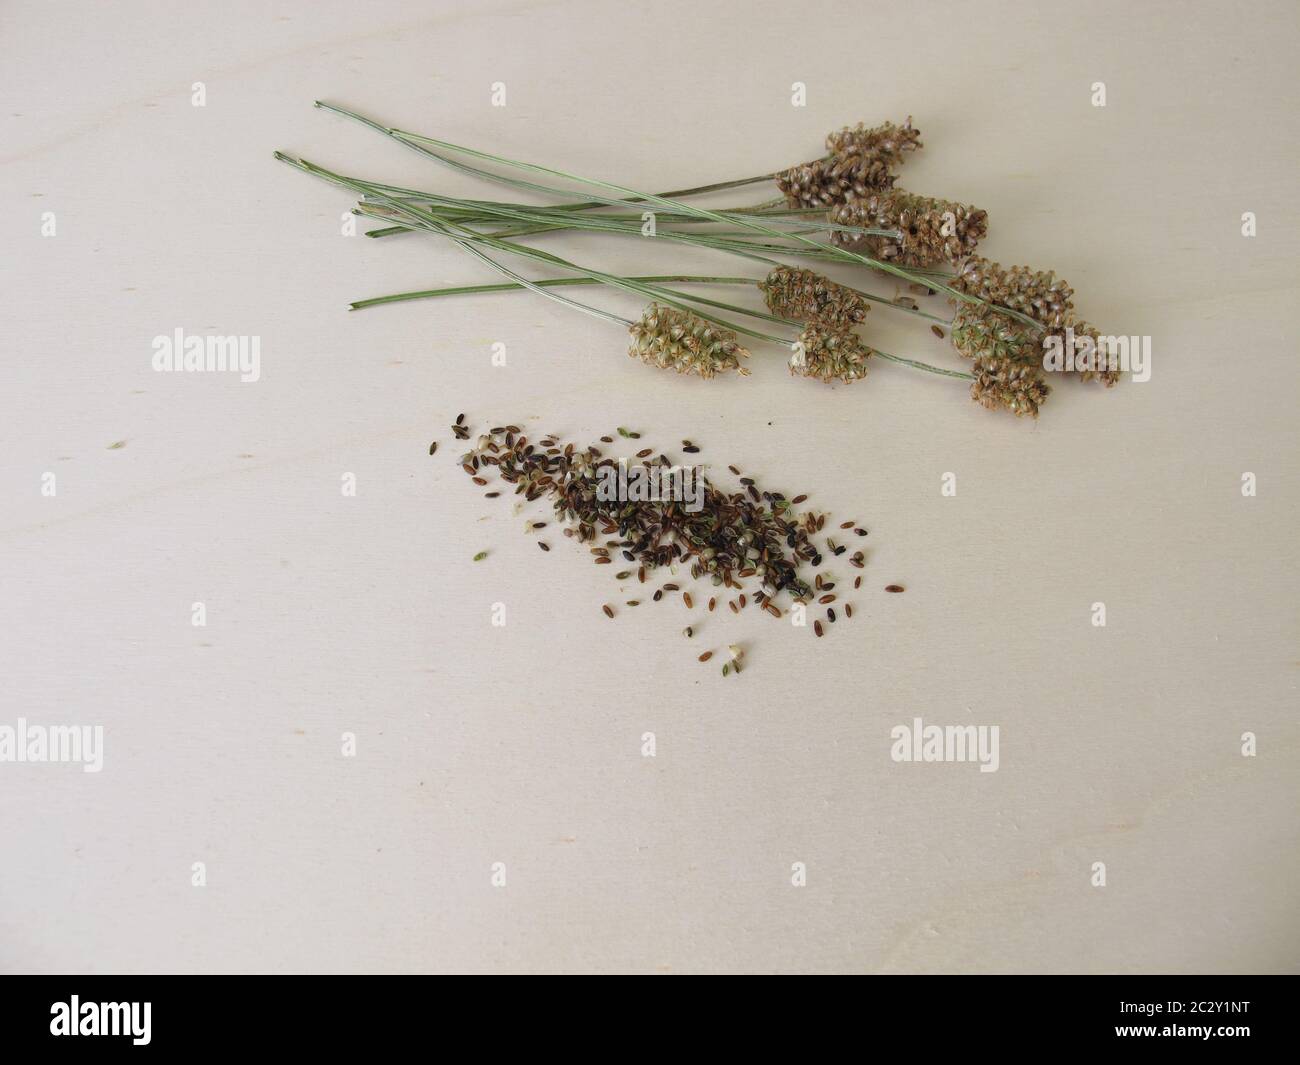 Edible ribwort plantain seeds and flower stalks Stock Photo